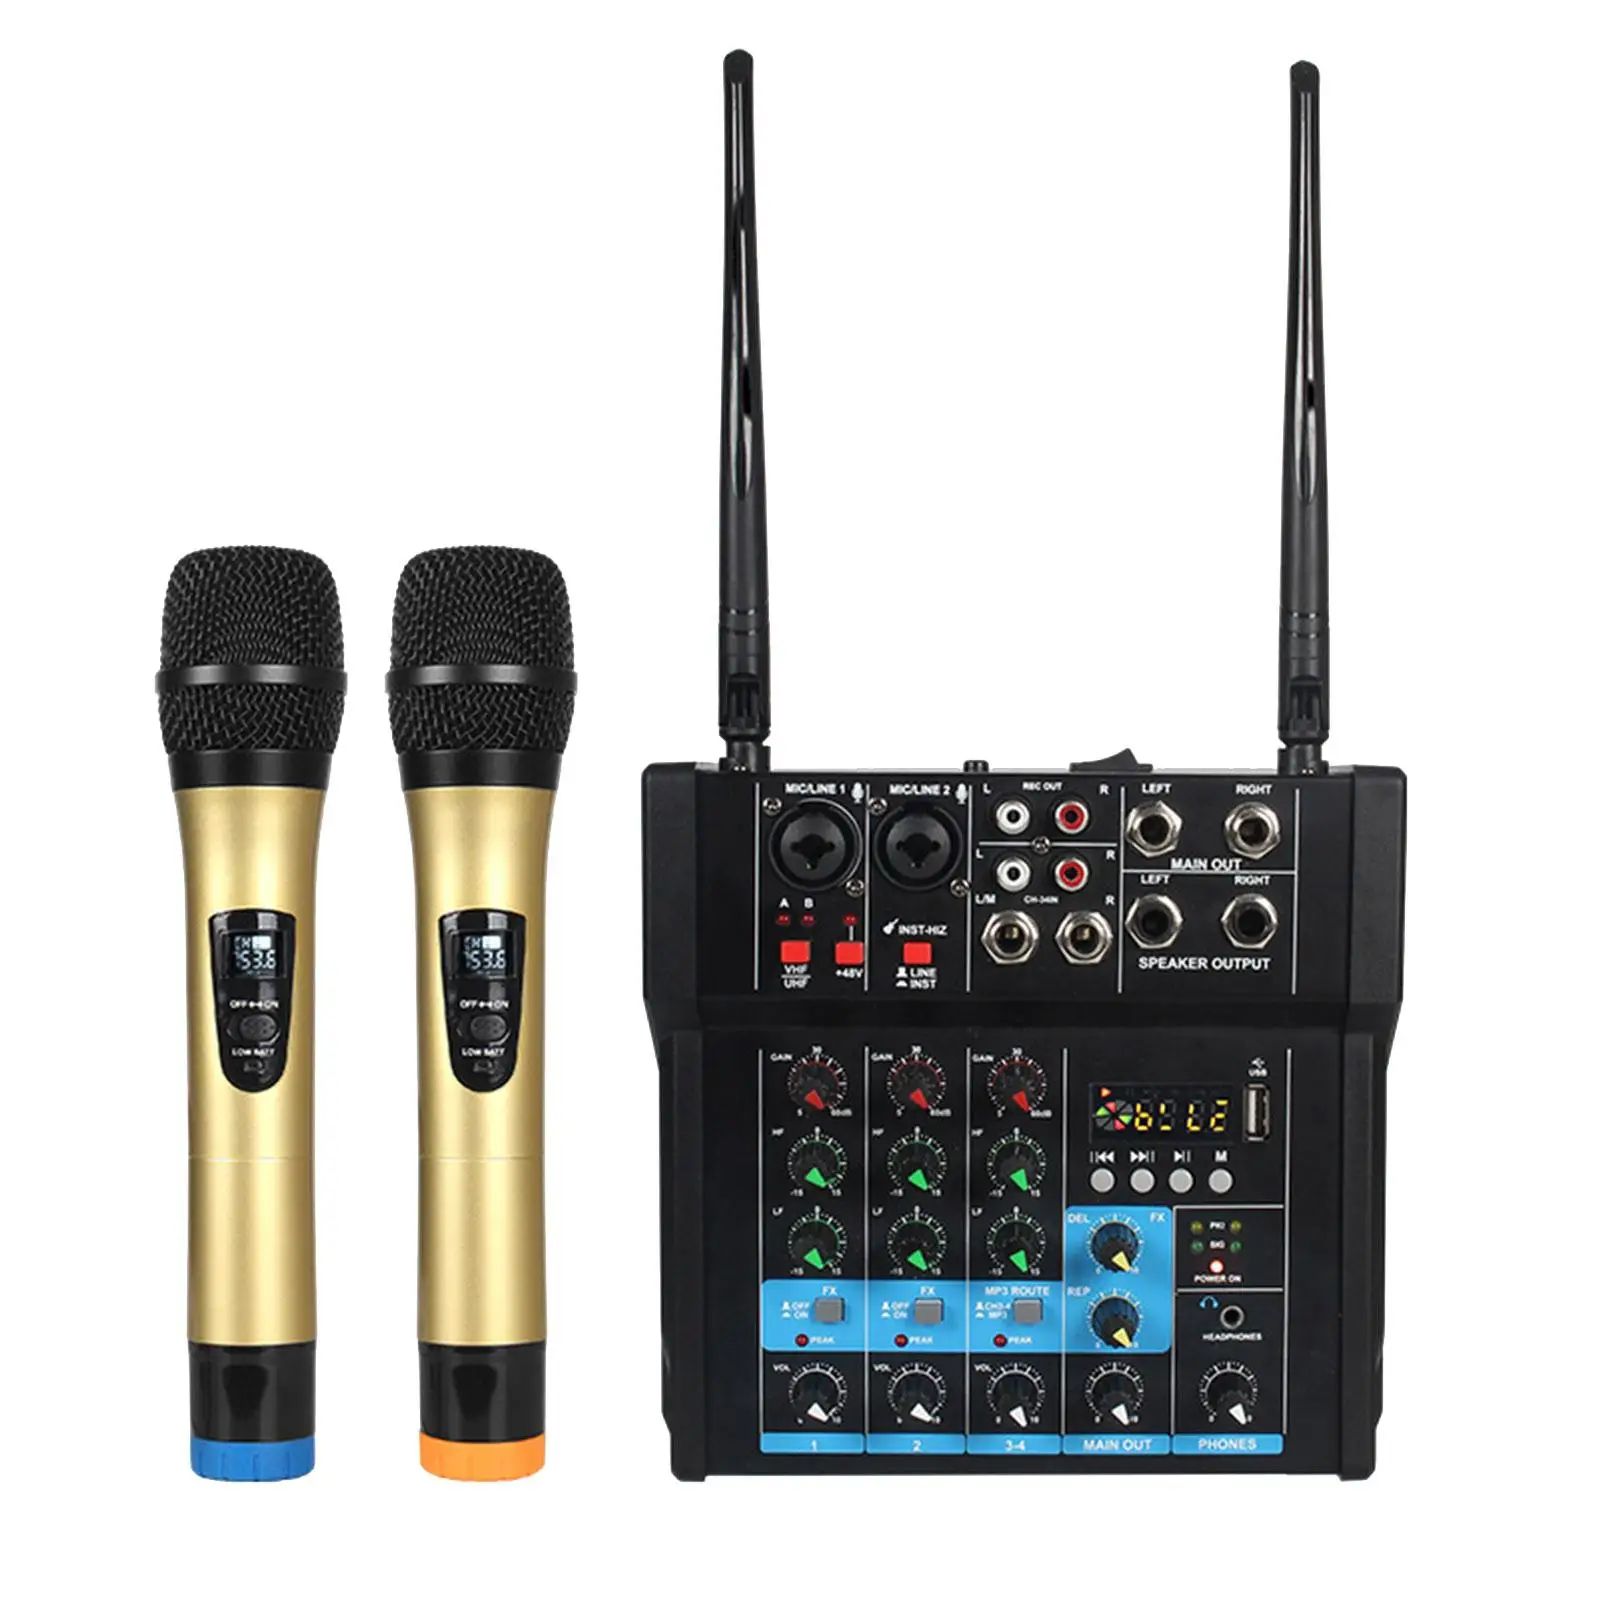 Audio Mixer with 2 Wireless Mic USB MP3 Bluetooth Sound Board Console System for PC Recording Live Streaming Karaoke